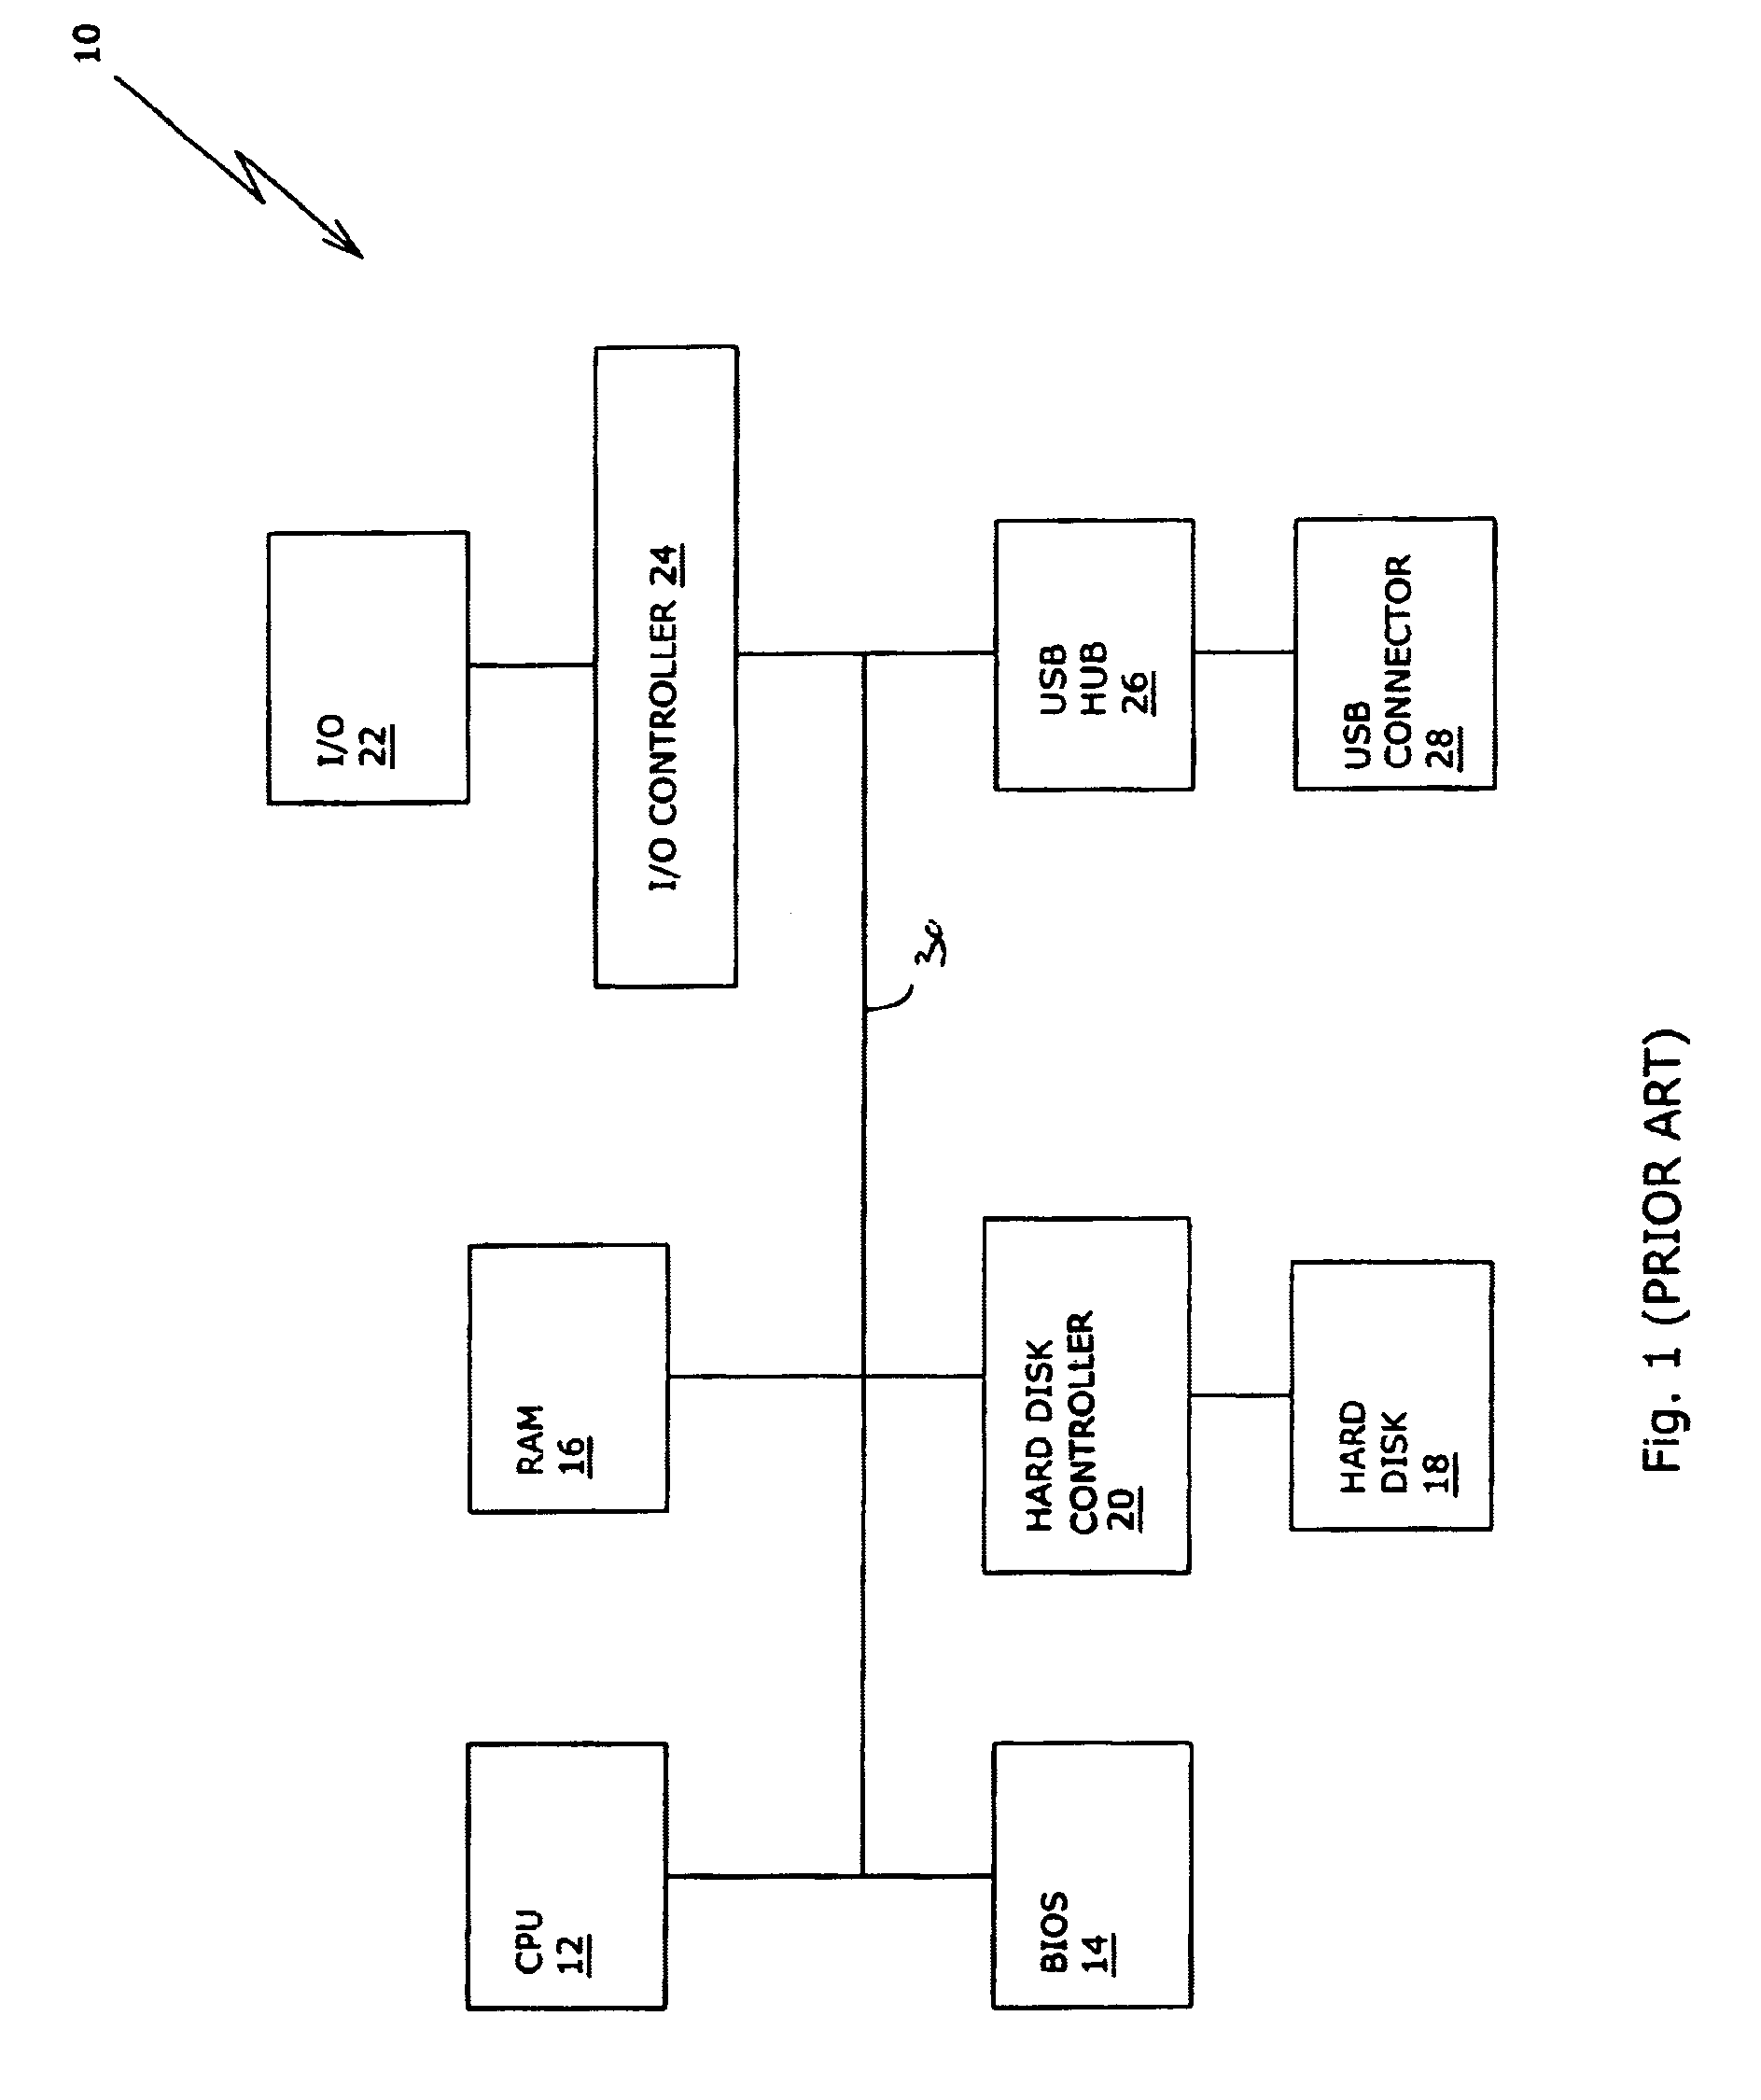 Mass storage device with boot code